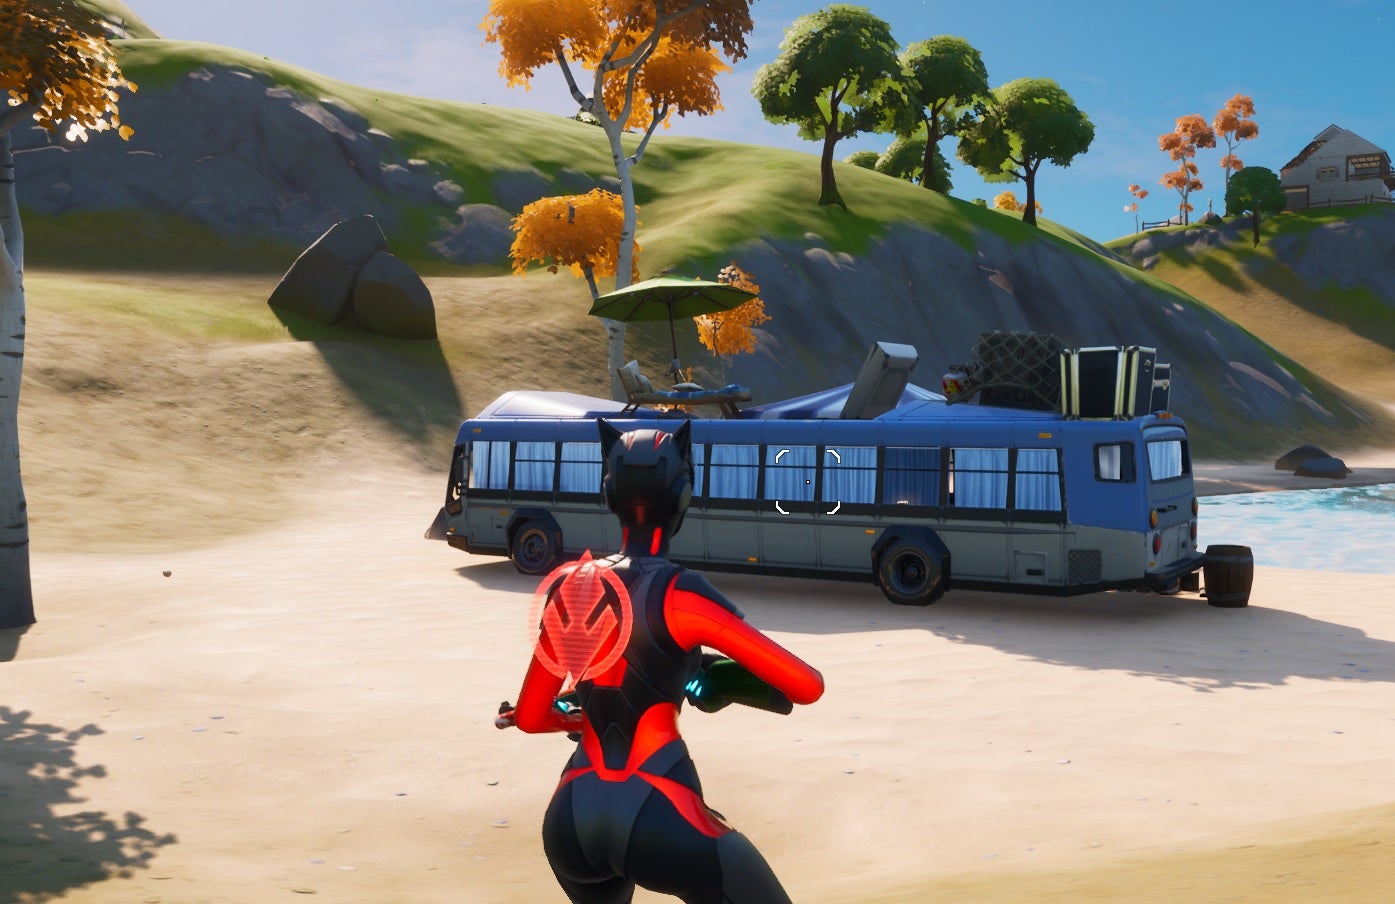 Image for Fortnite: Chapter 2 - Dance at Rainbow Rentals, beach bus and Lake Canoe